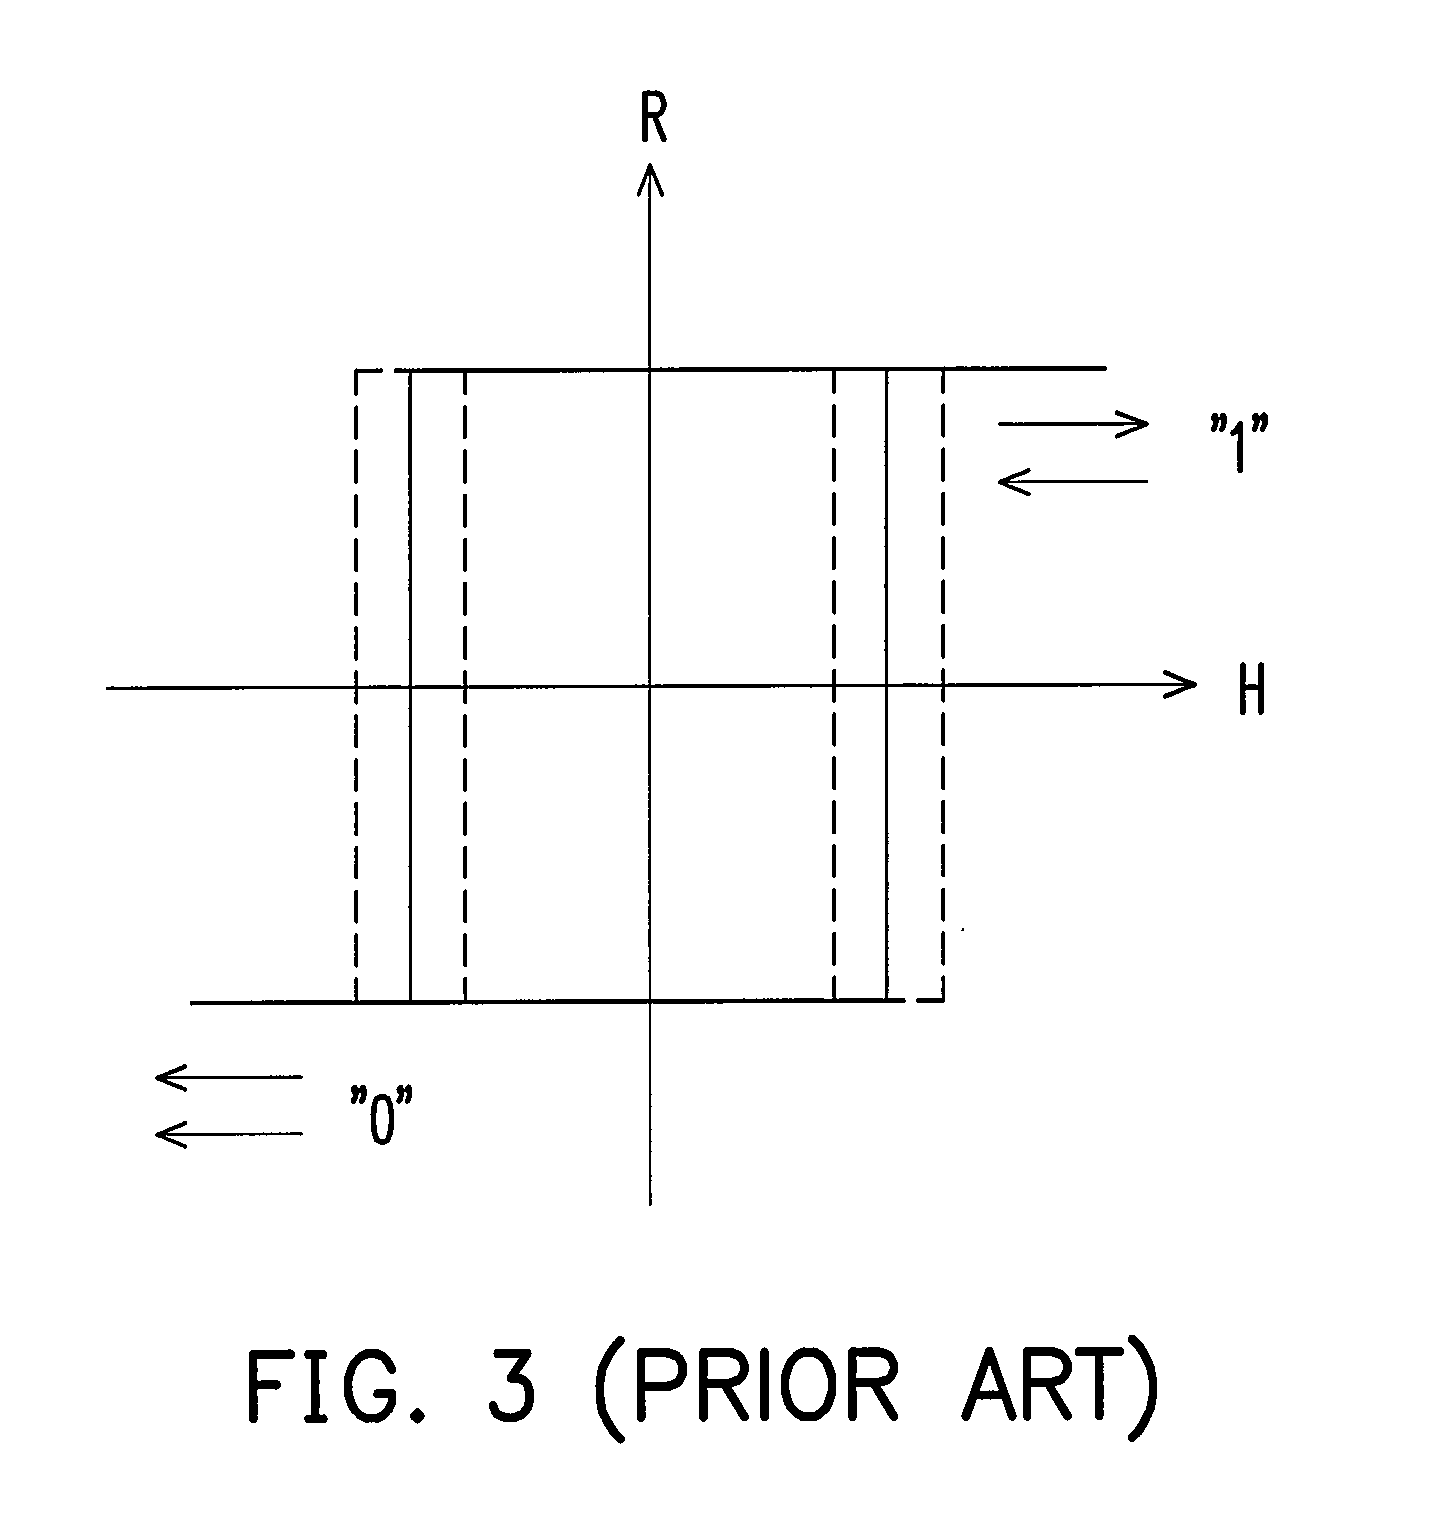 Method for accessing data on magnetic memory